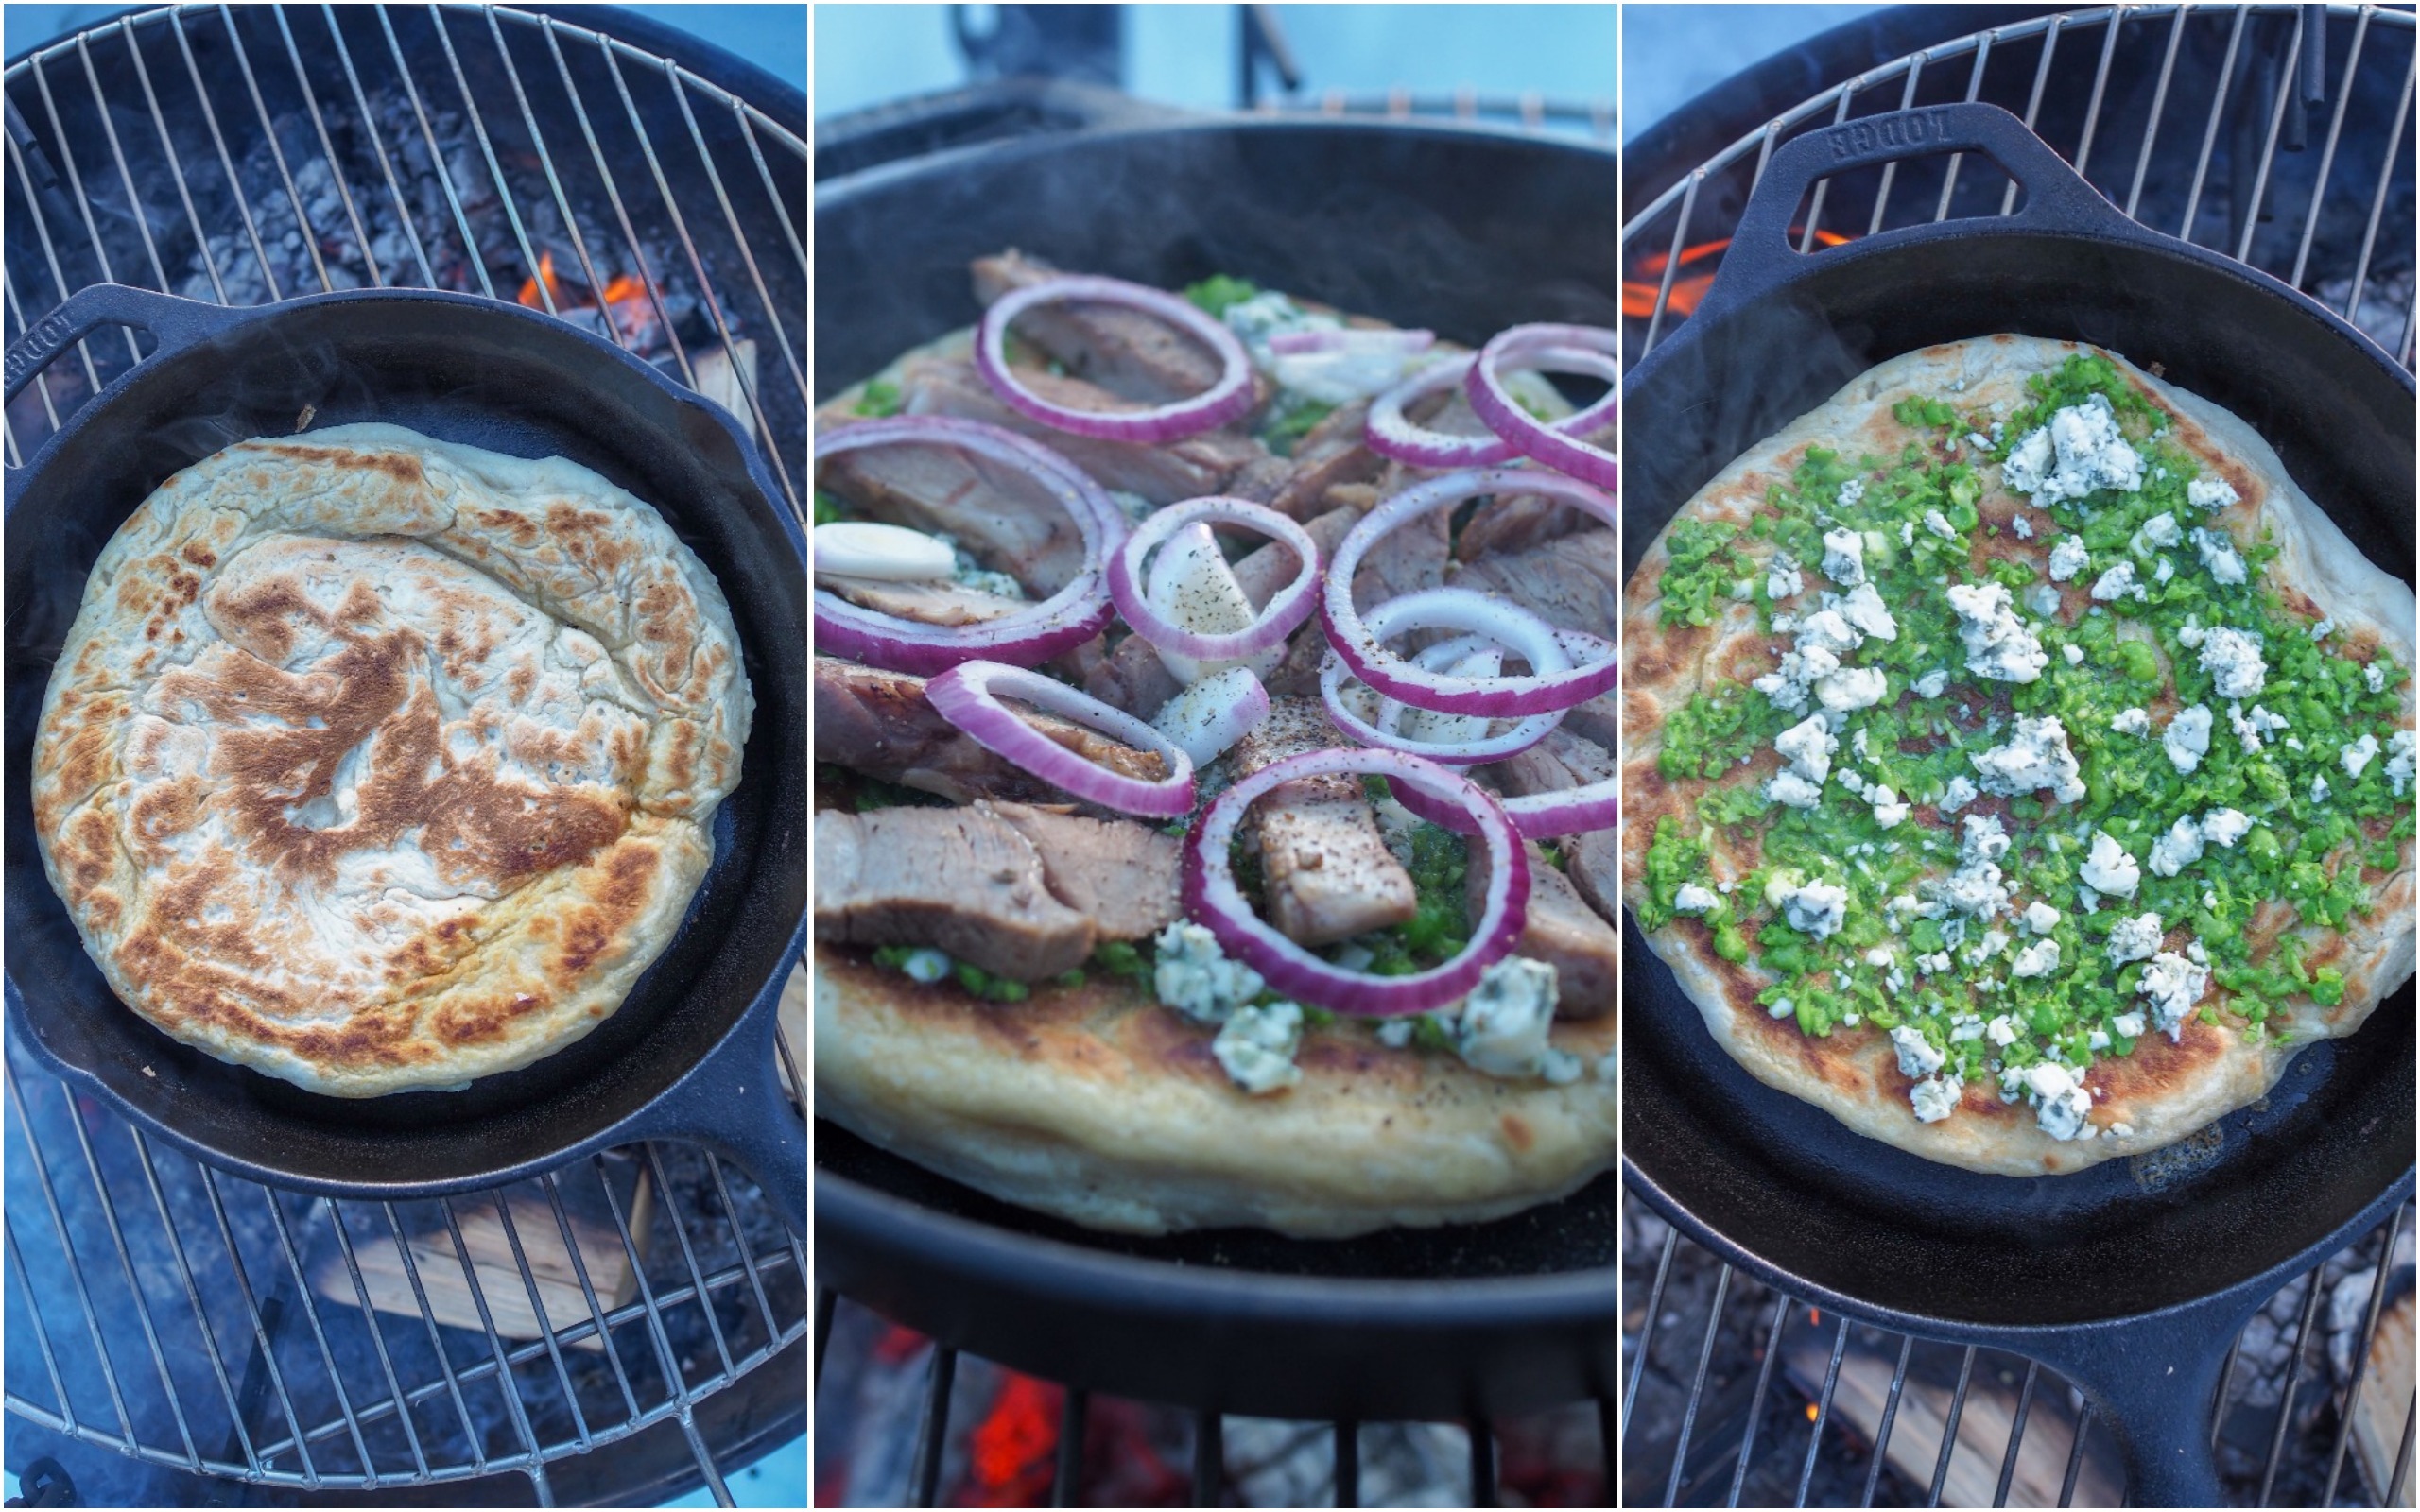 Outdoor Skillet Pizza with Lamb and Pea Pesto